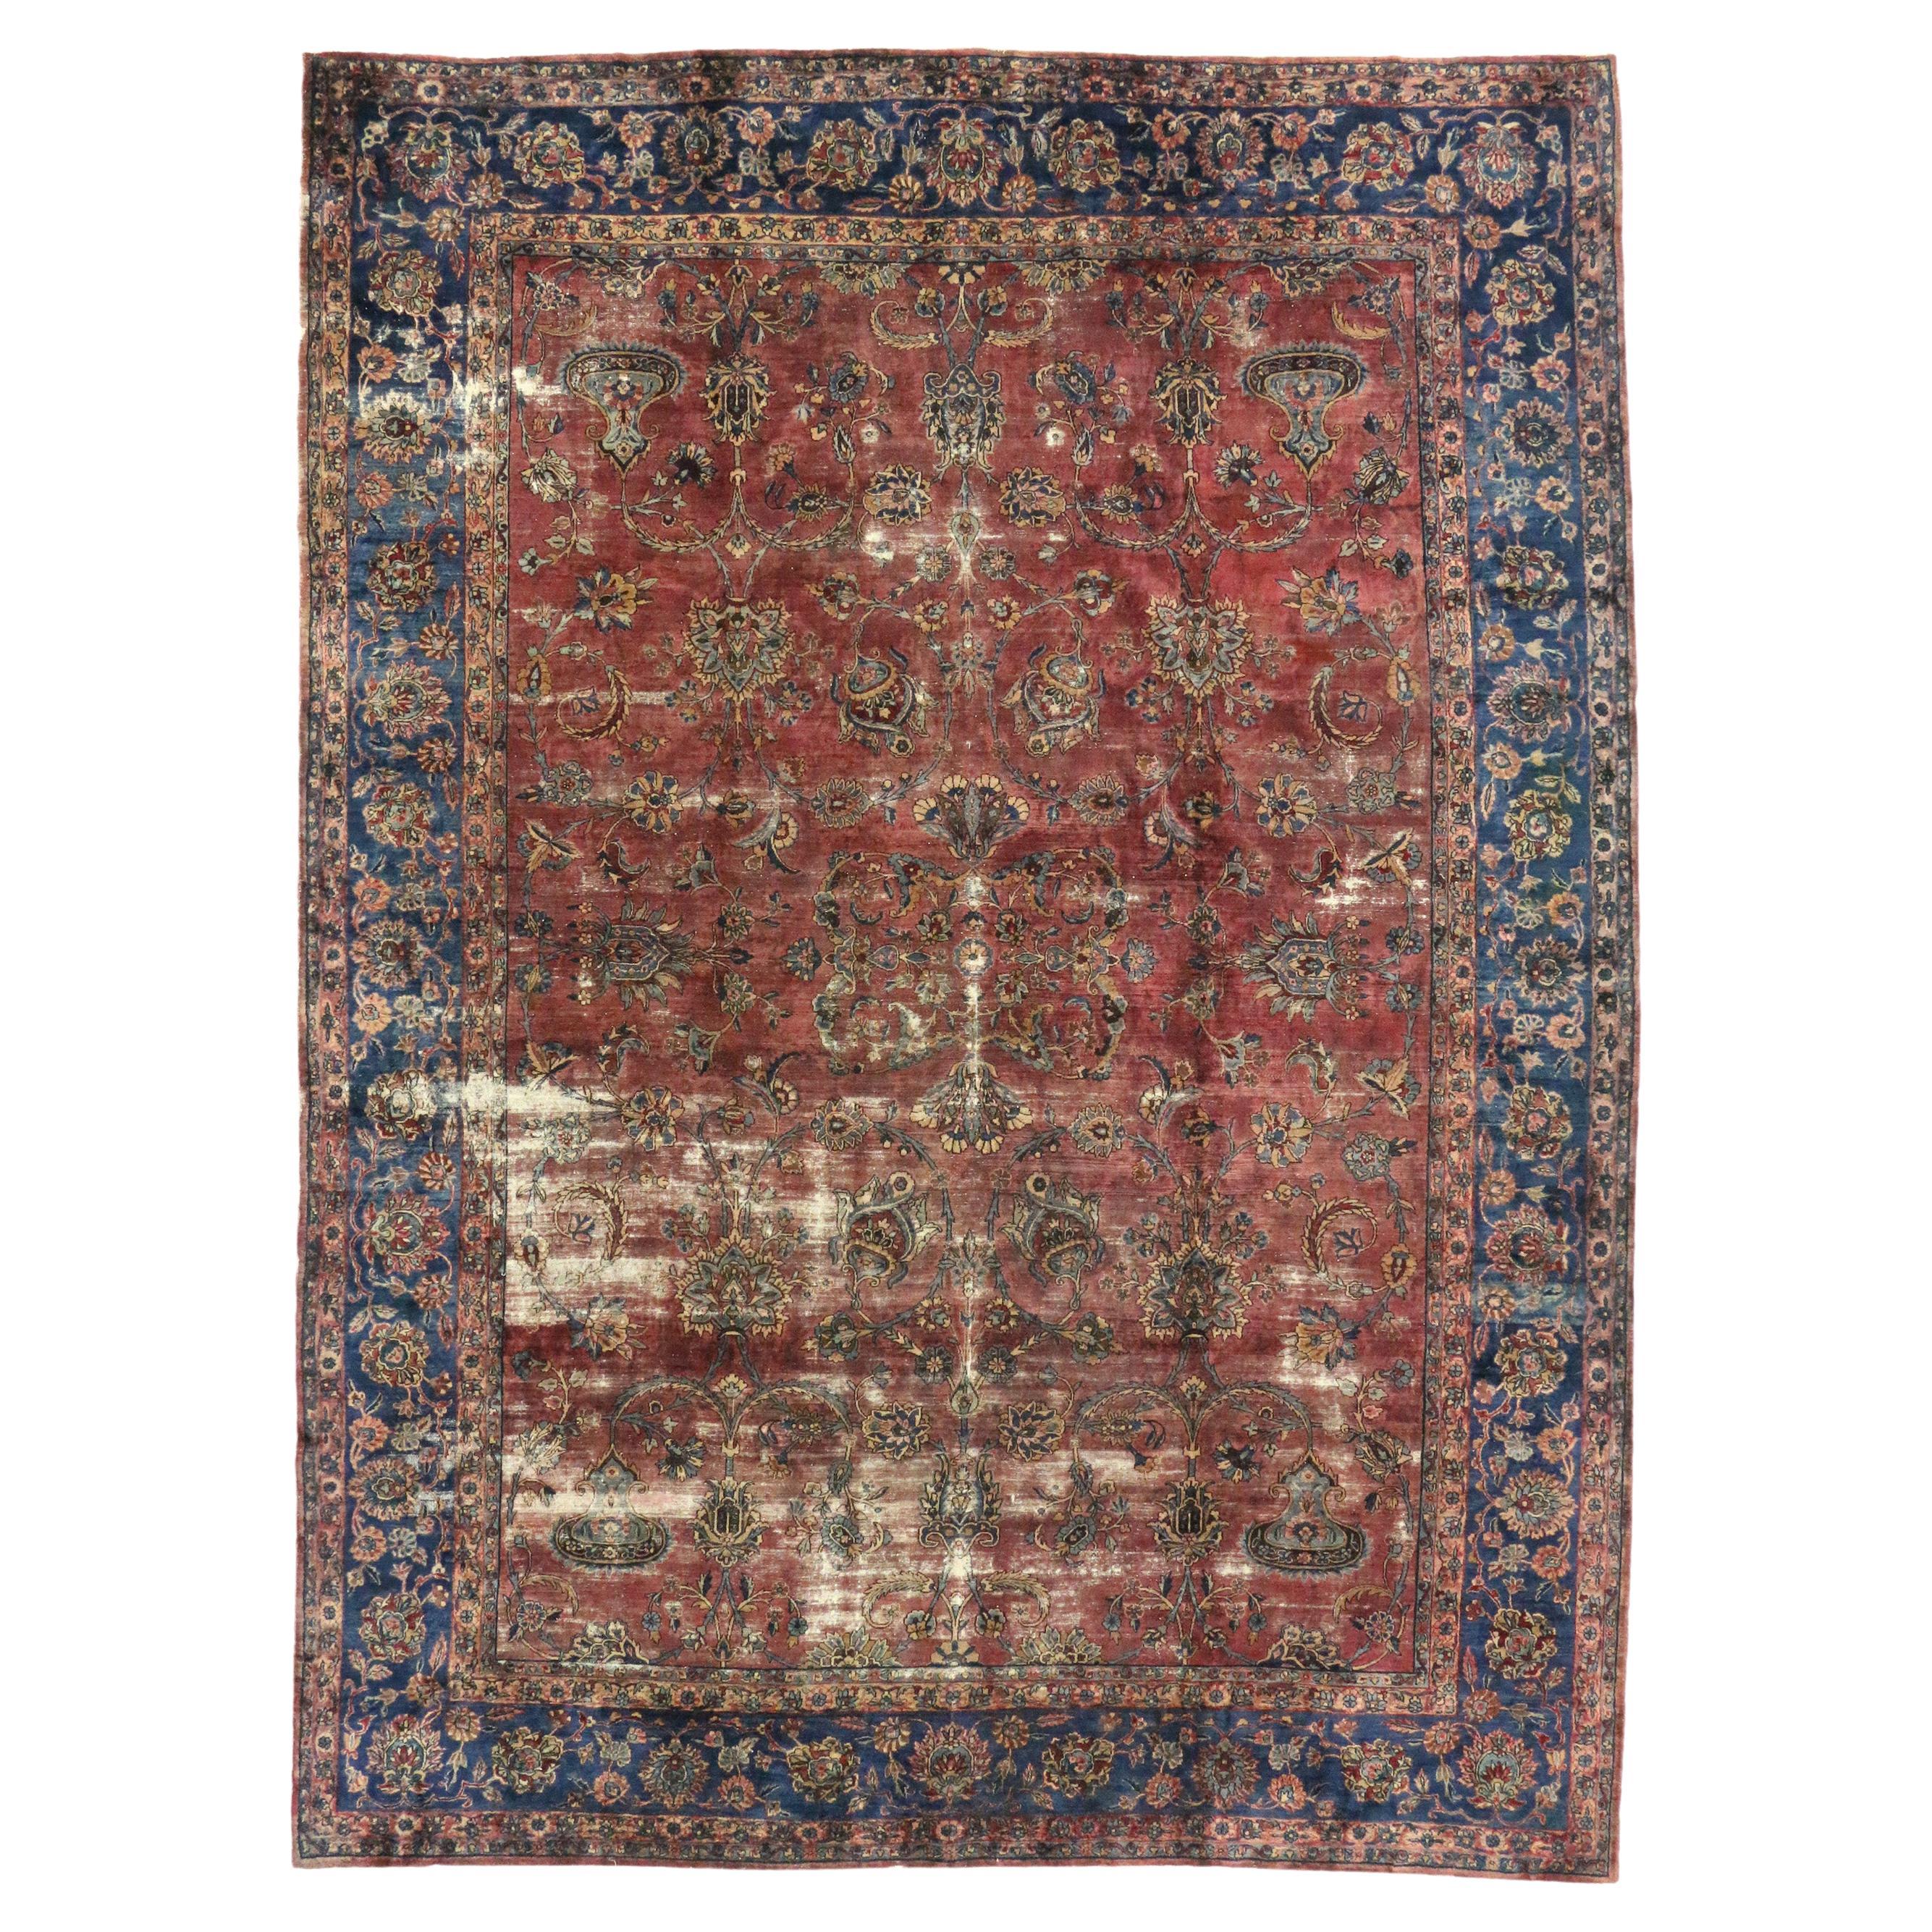 Distressed Antique Persian Kerman Rug with New England Cape Cod Style For Sale